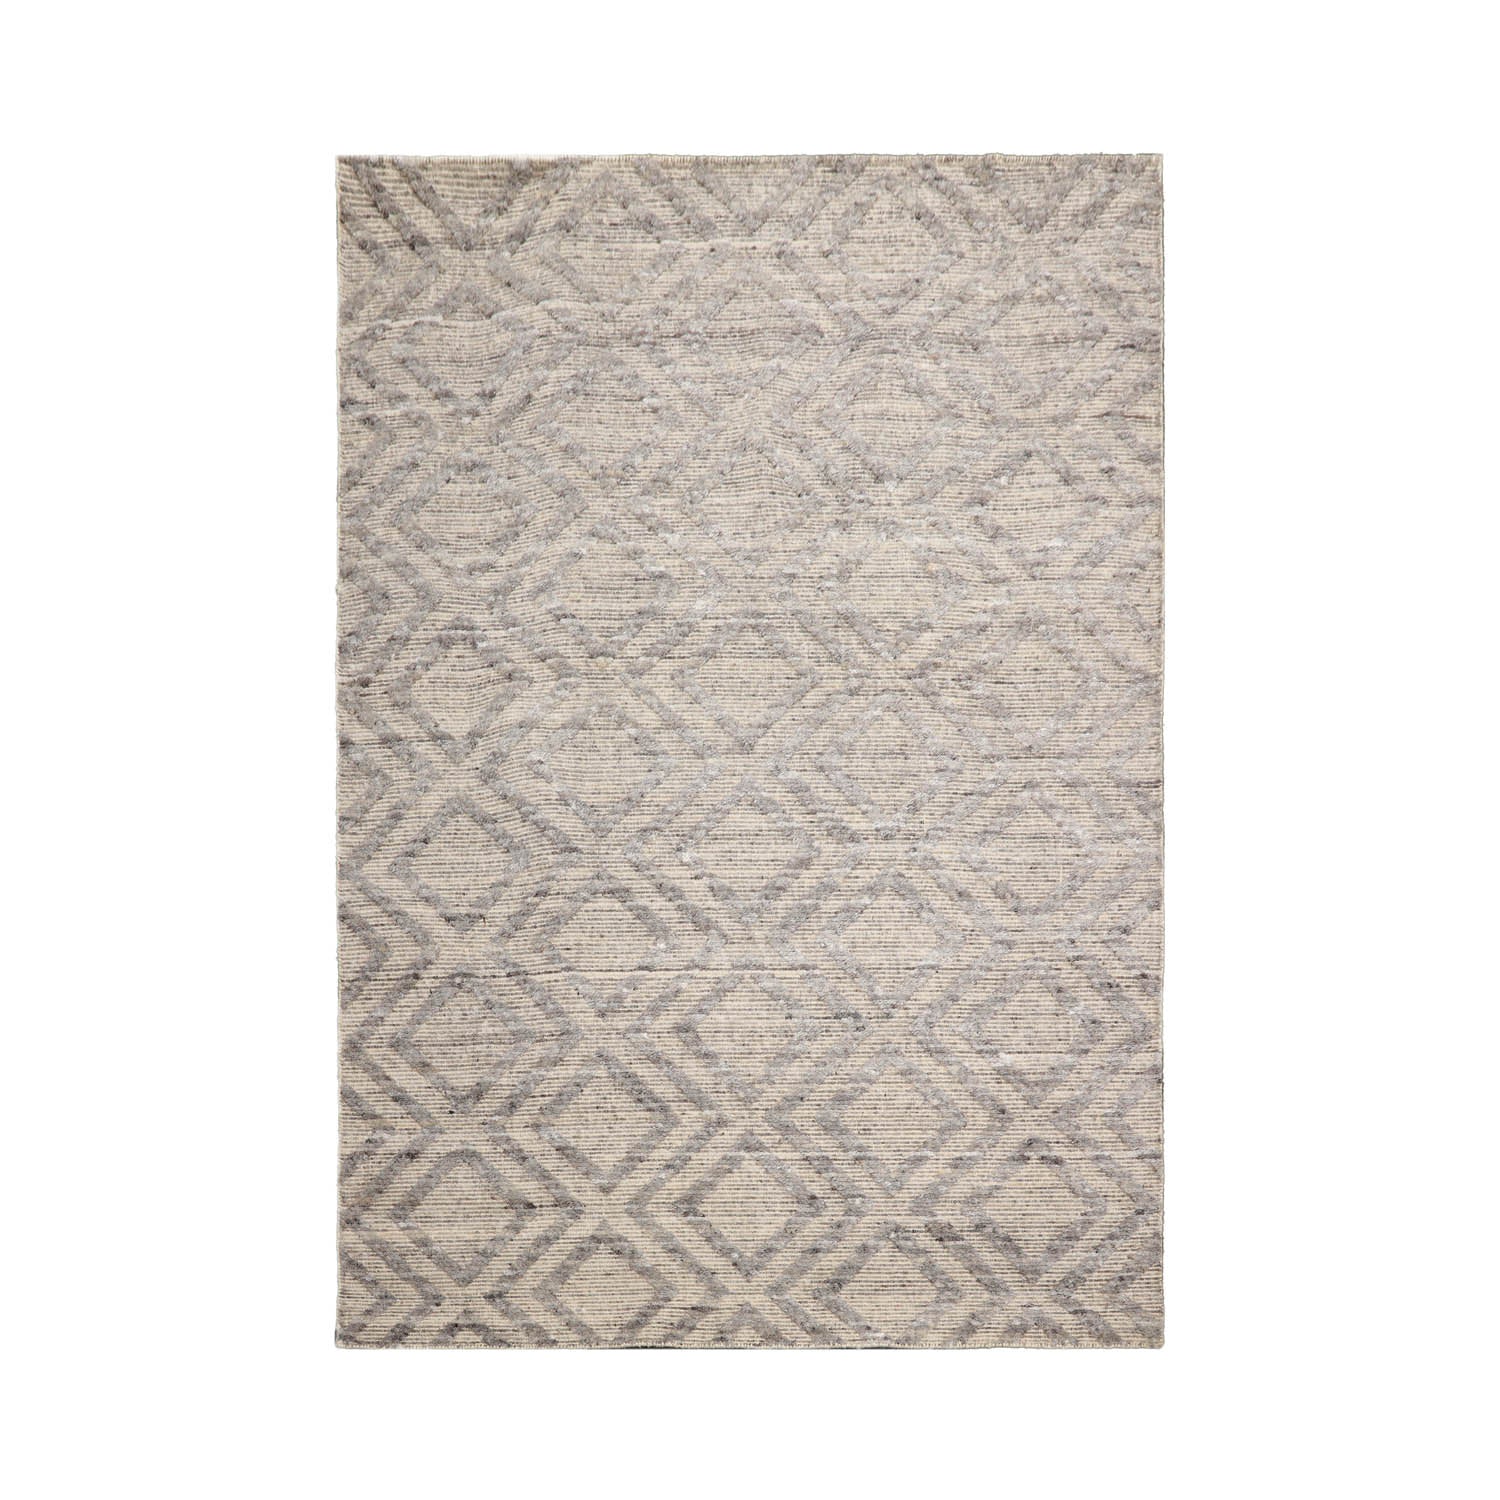 Cowarts LoomBloom Hand Knotted Oriental Area Rug with Geometric Design in 5x8 Beige